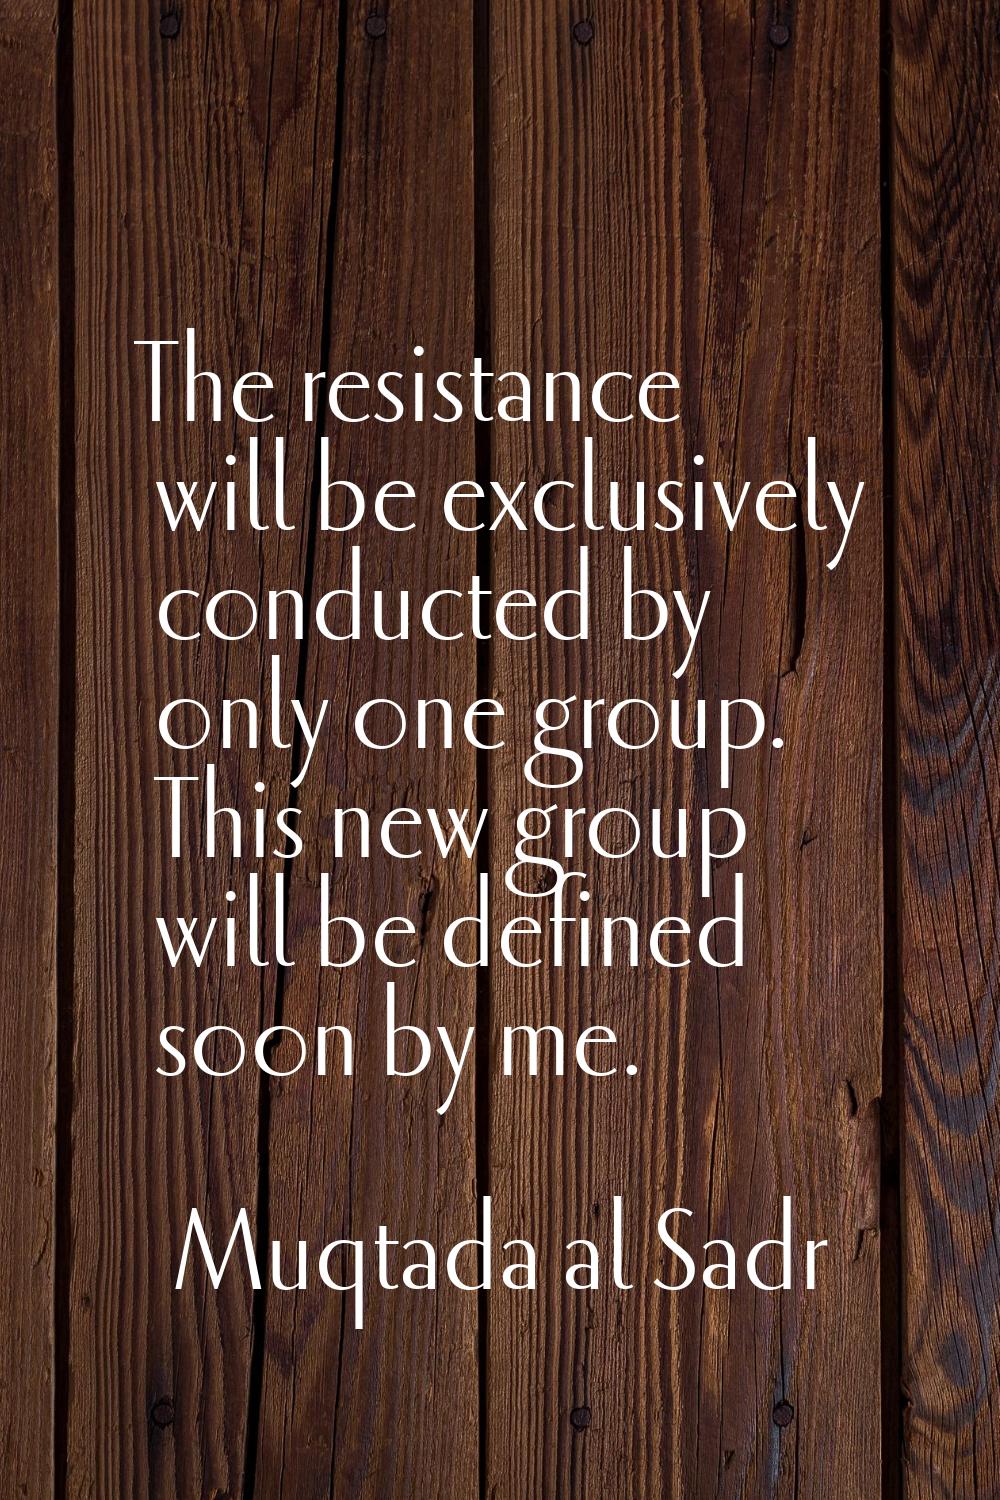 The resistance will be exclusively conducted by only one group. This new group will be defined soon